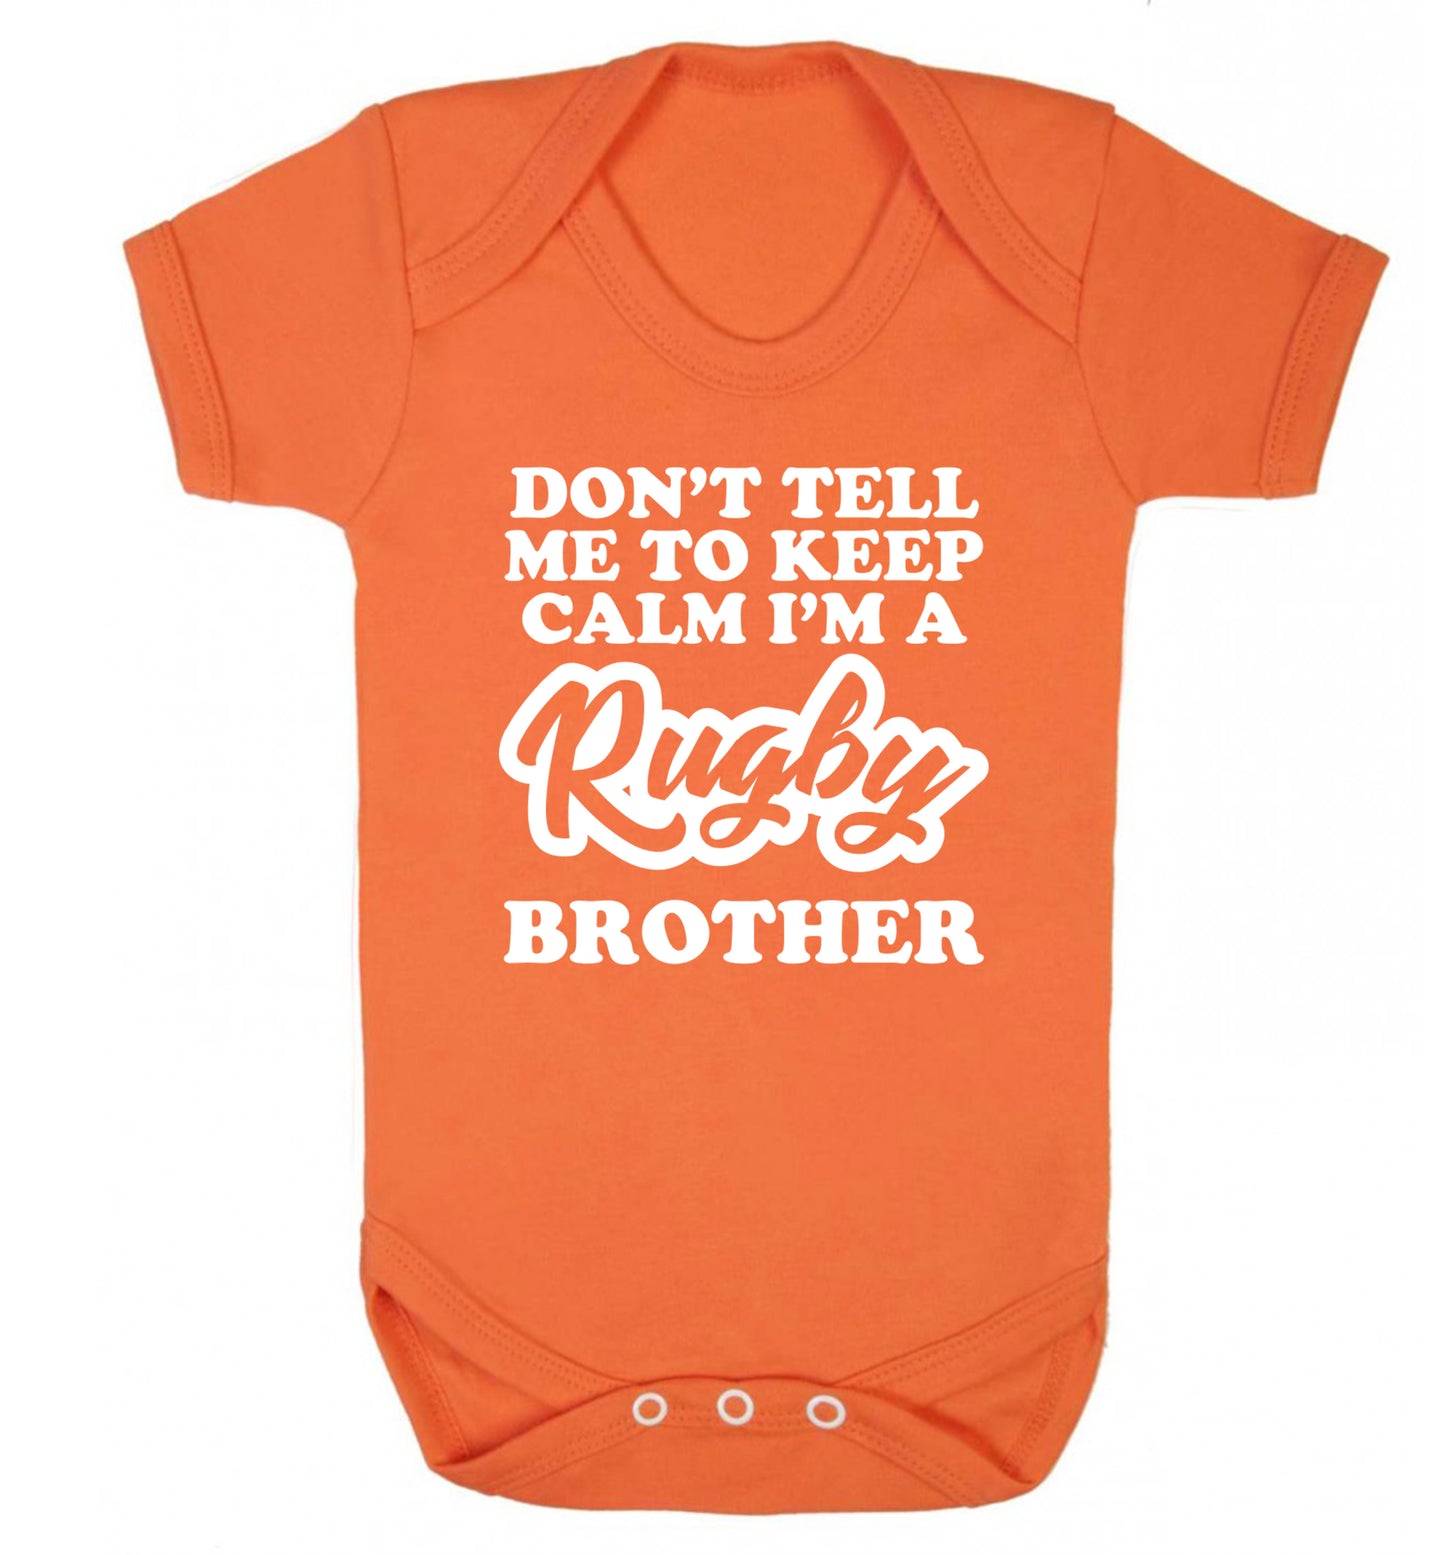 Don't tell me keep calm I'm a rugby brother Baby Vest orange 18-24 months